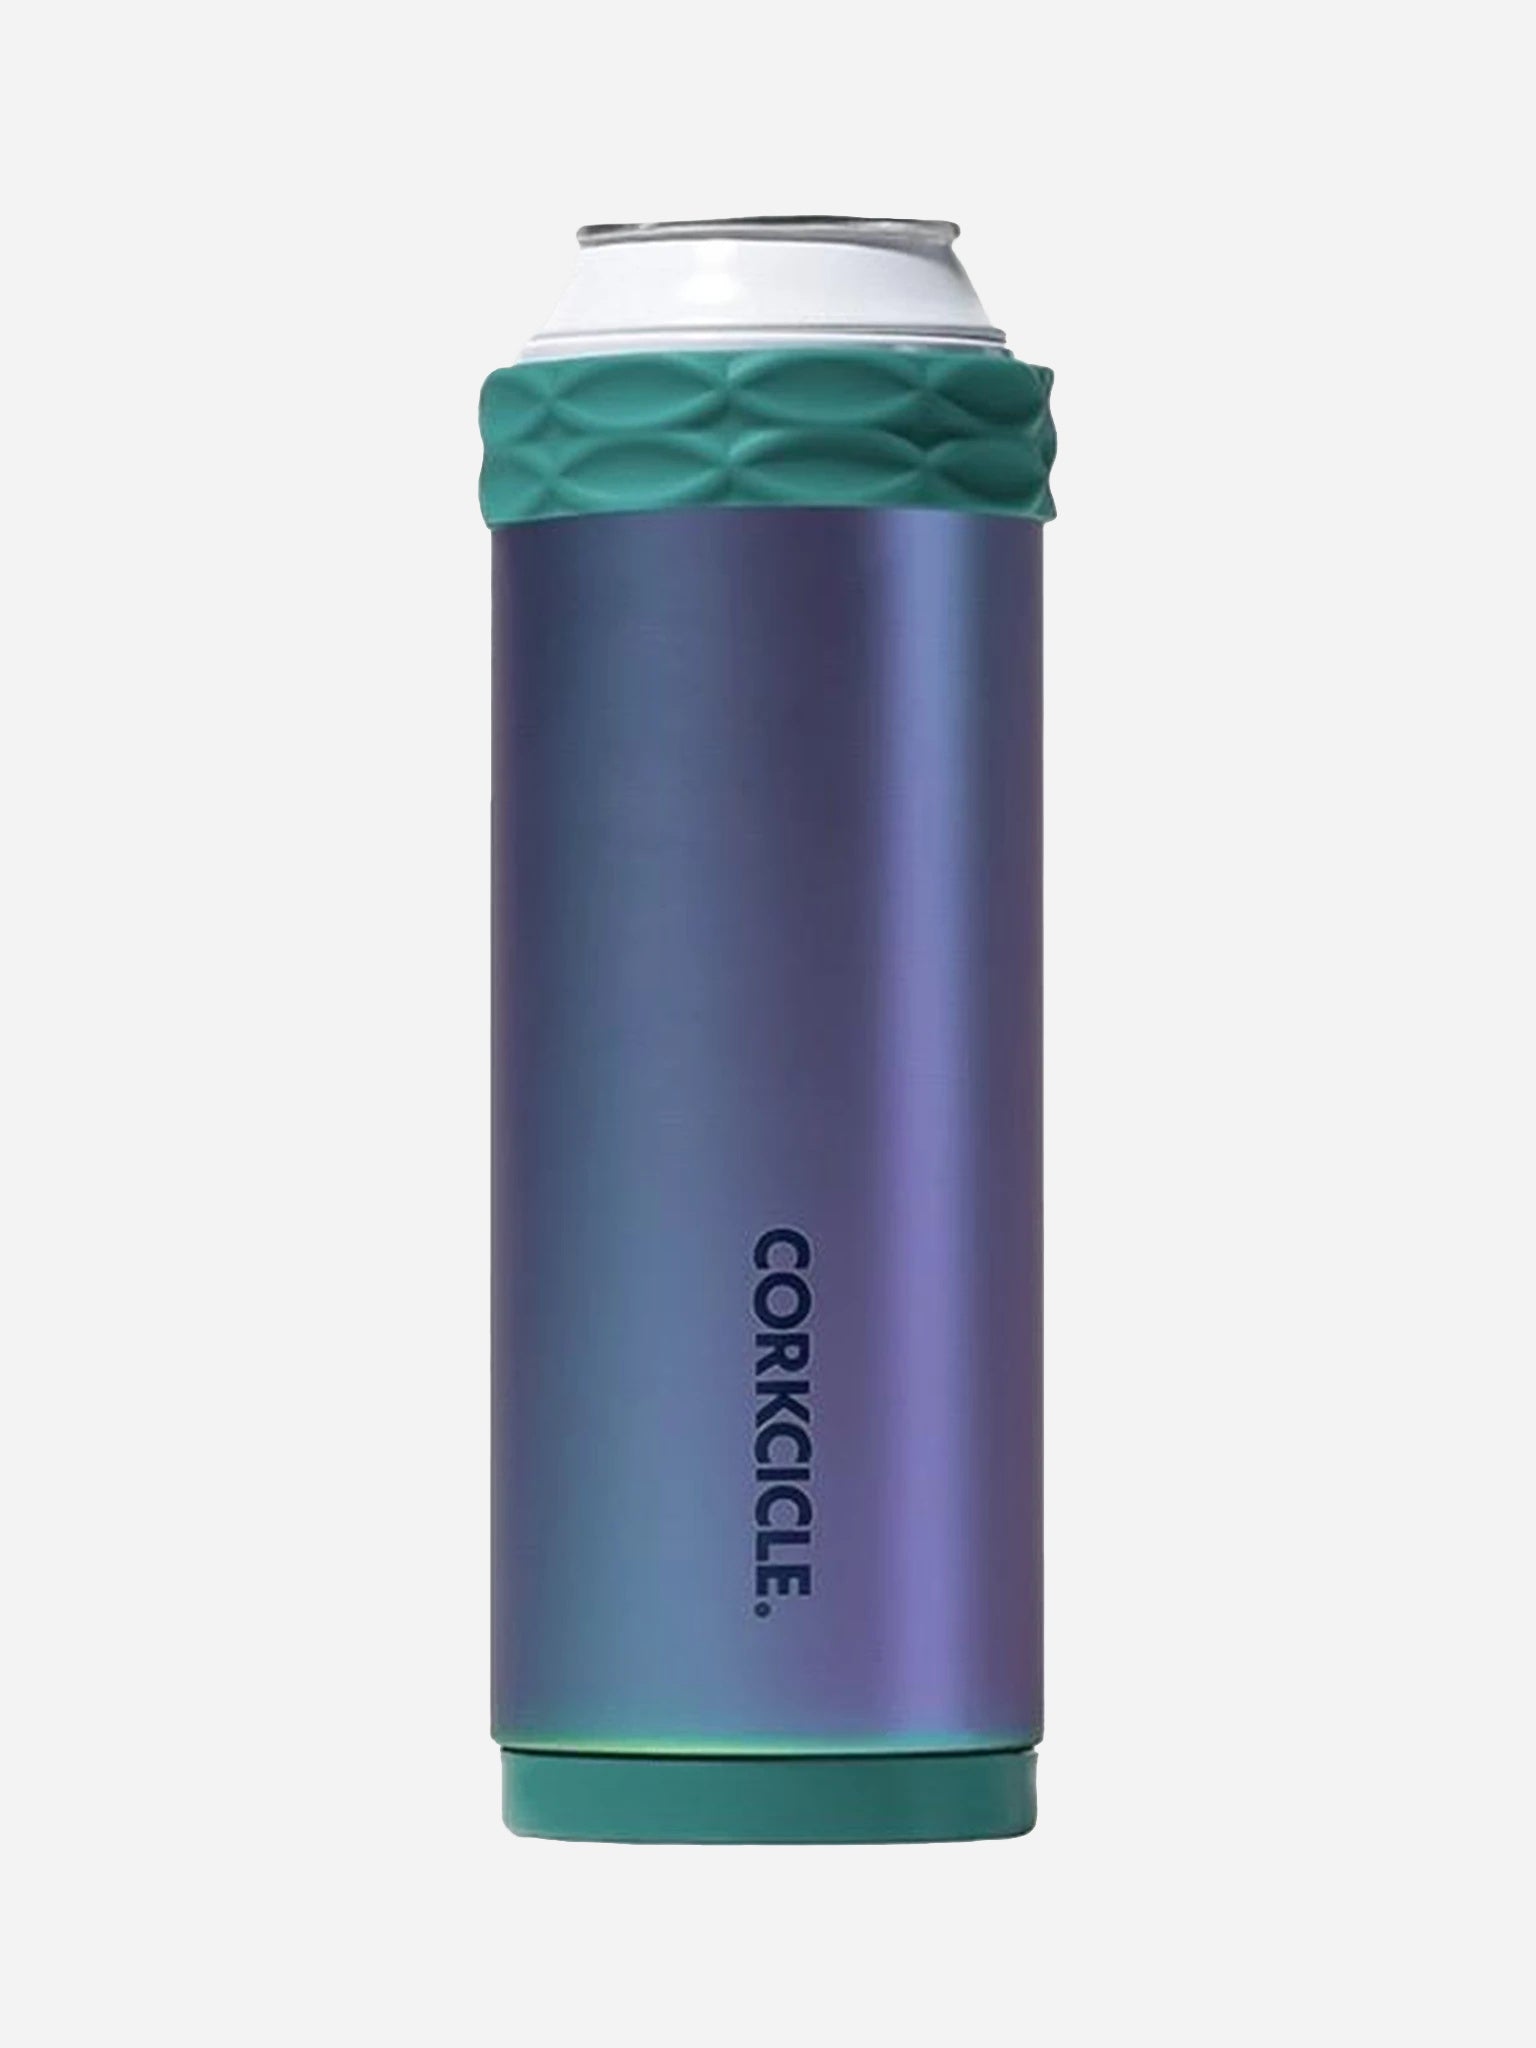 Corkcicle Can Cooler - Slim - White